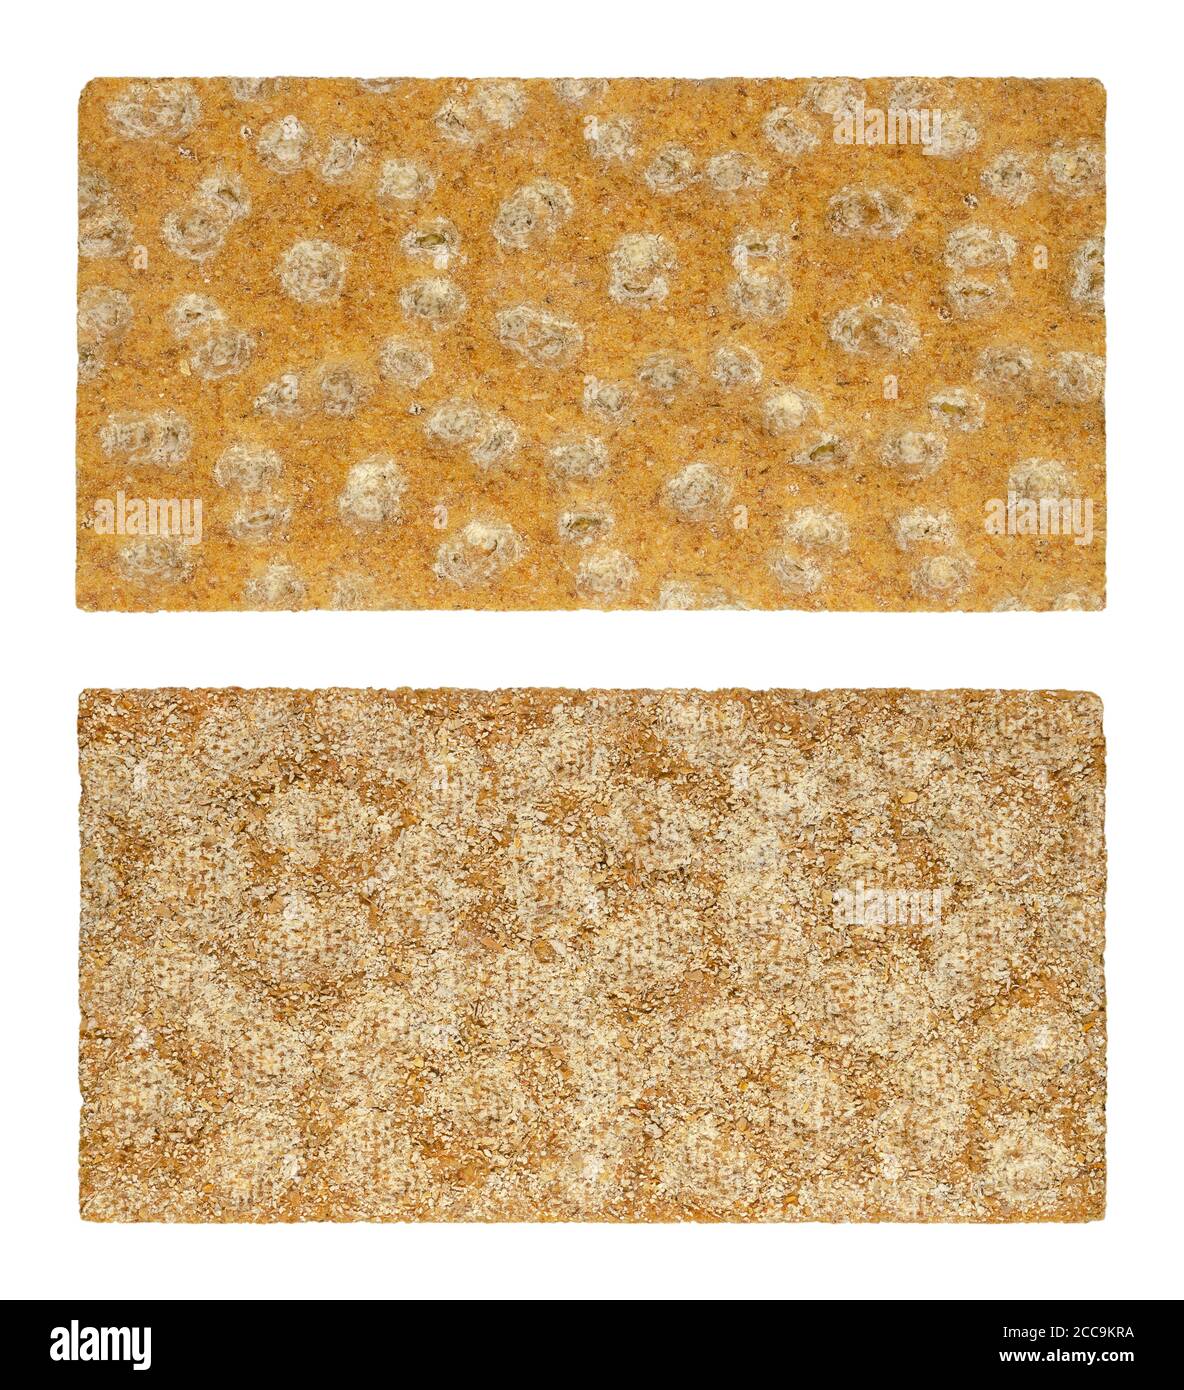 Rye crispbread from the front and back side, close-up from above. Rectangle shaped flat and dry cracker made of rye flour. Light bread. Keeps fresh. Stock Photo